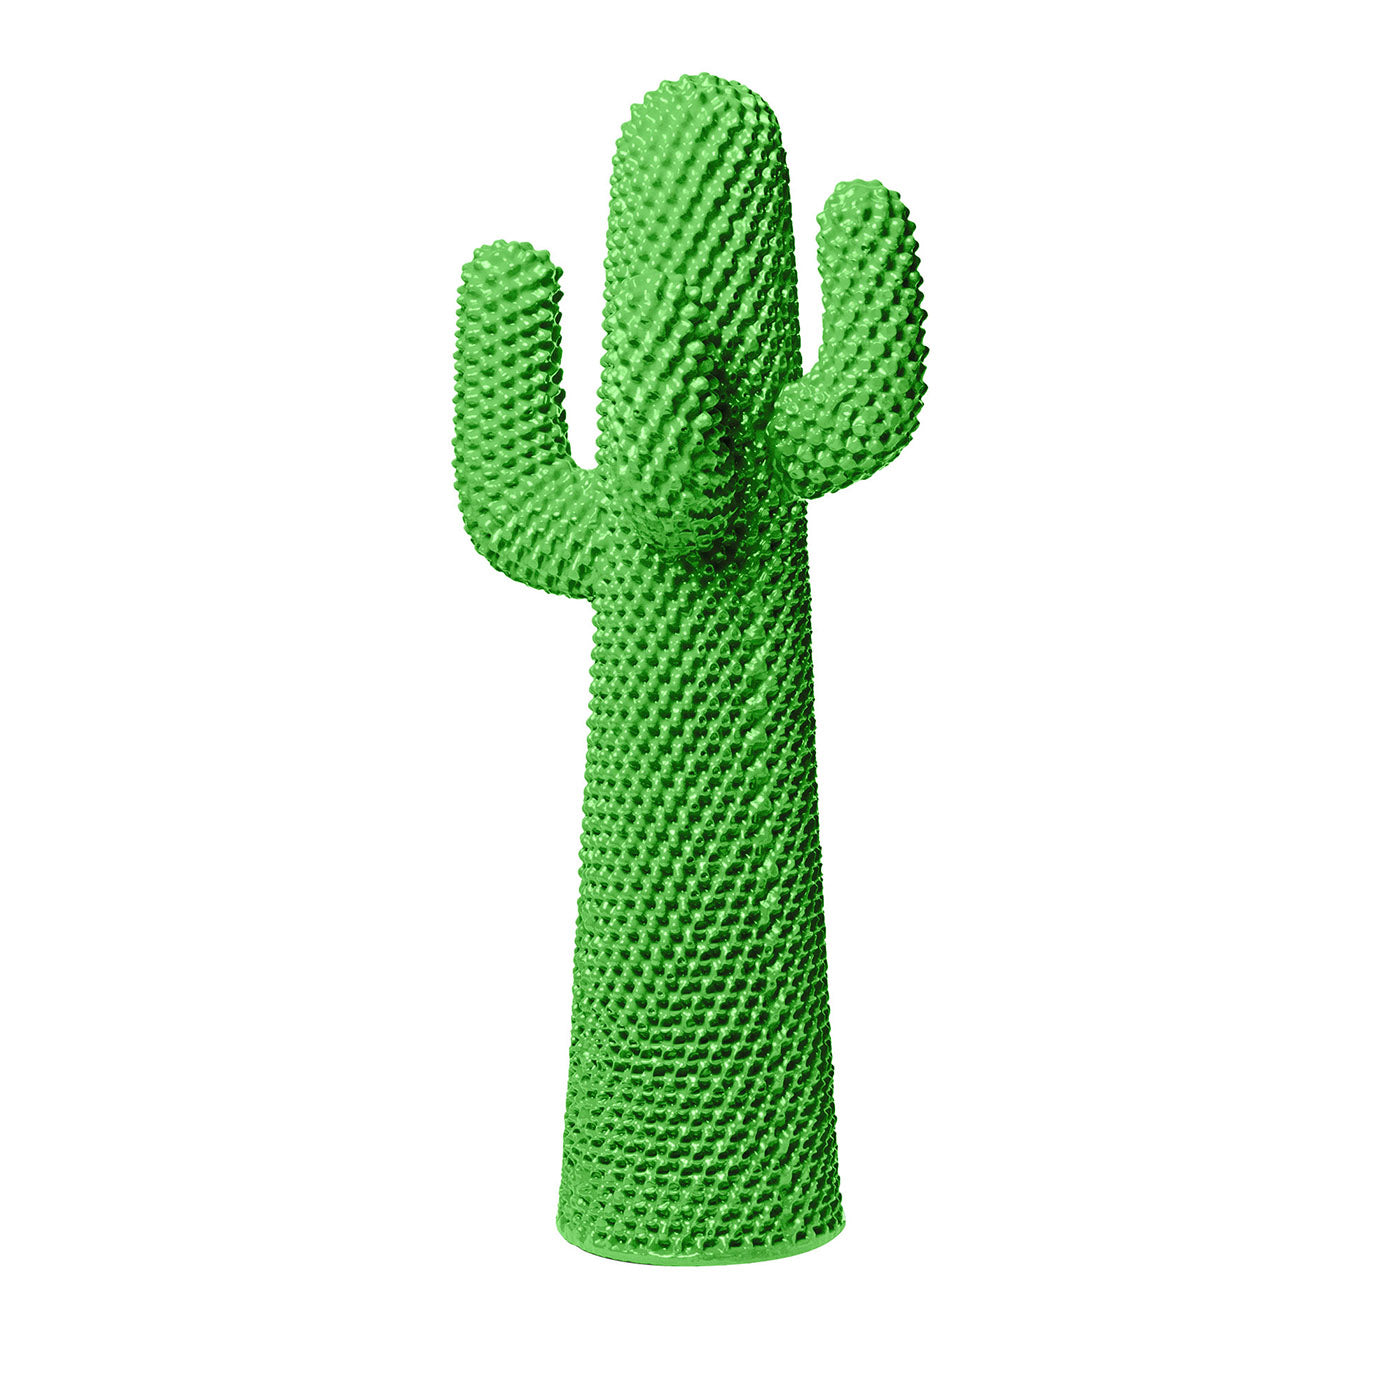 Another Green Cactus Coat Stand by Drocco/Mello